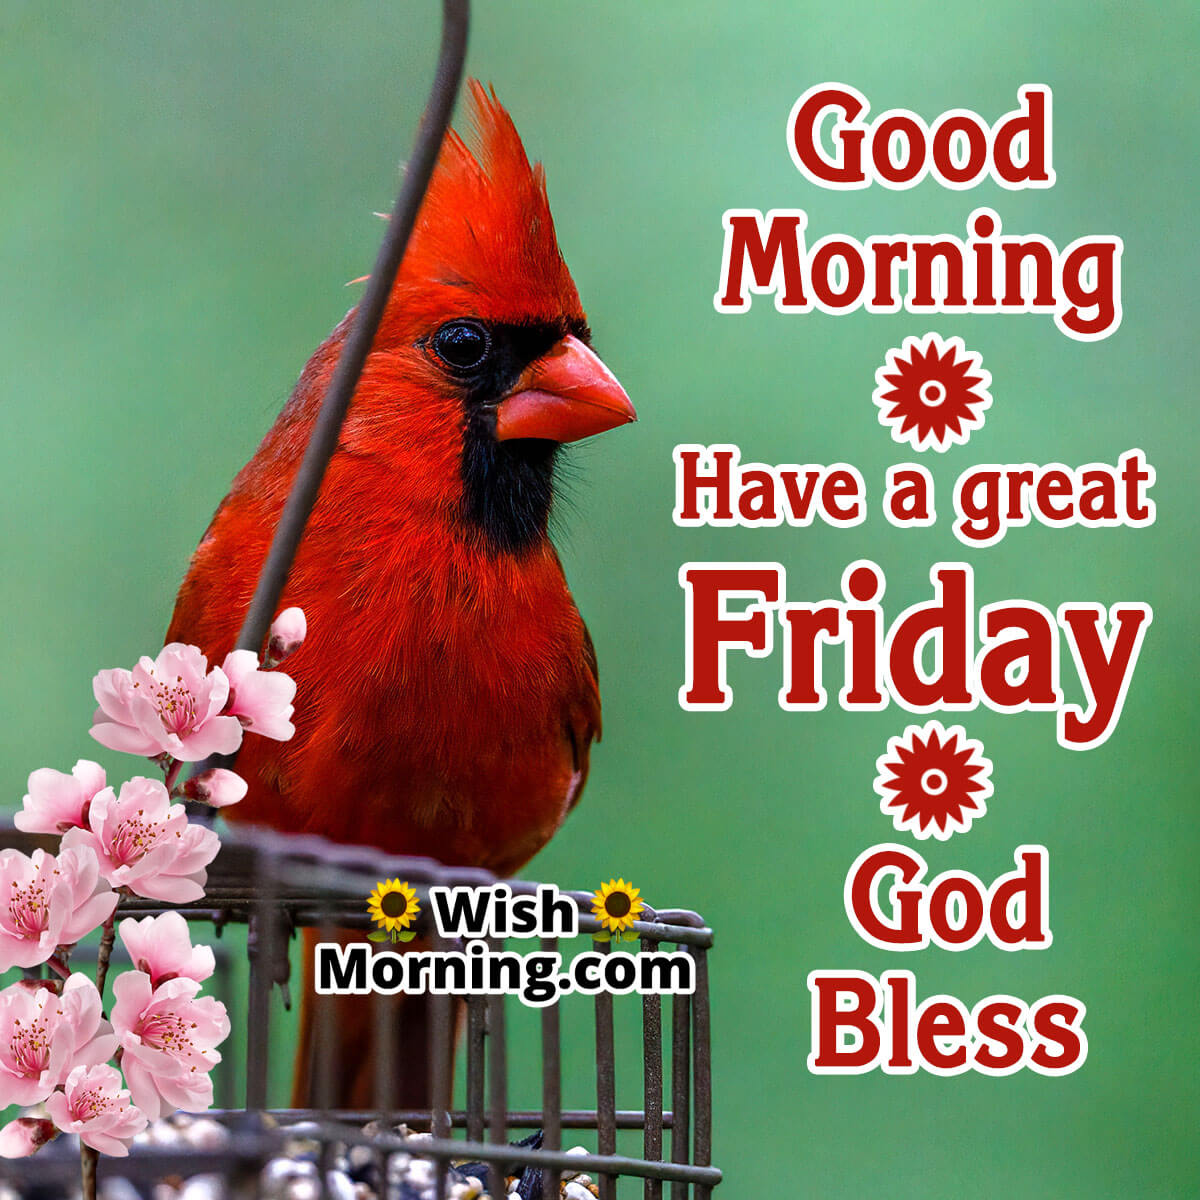 Good Morning Have A Great Friday God Bless